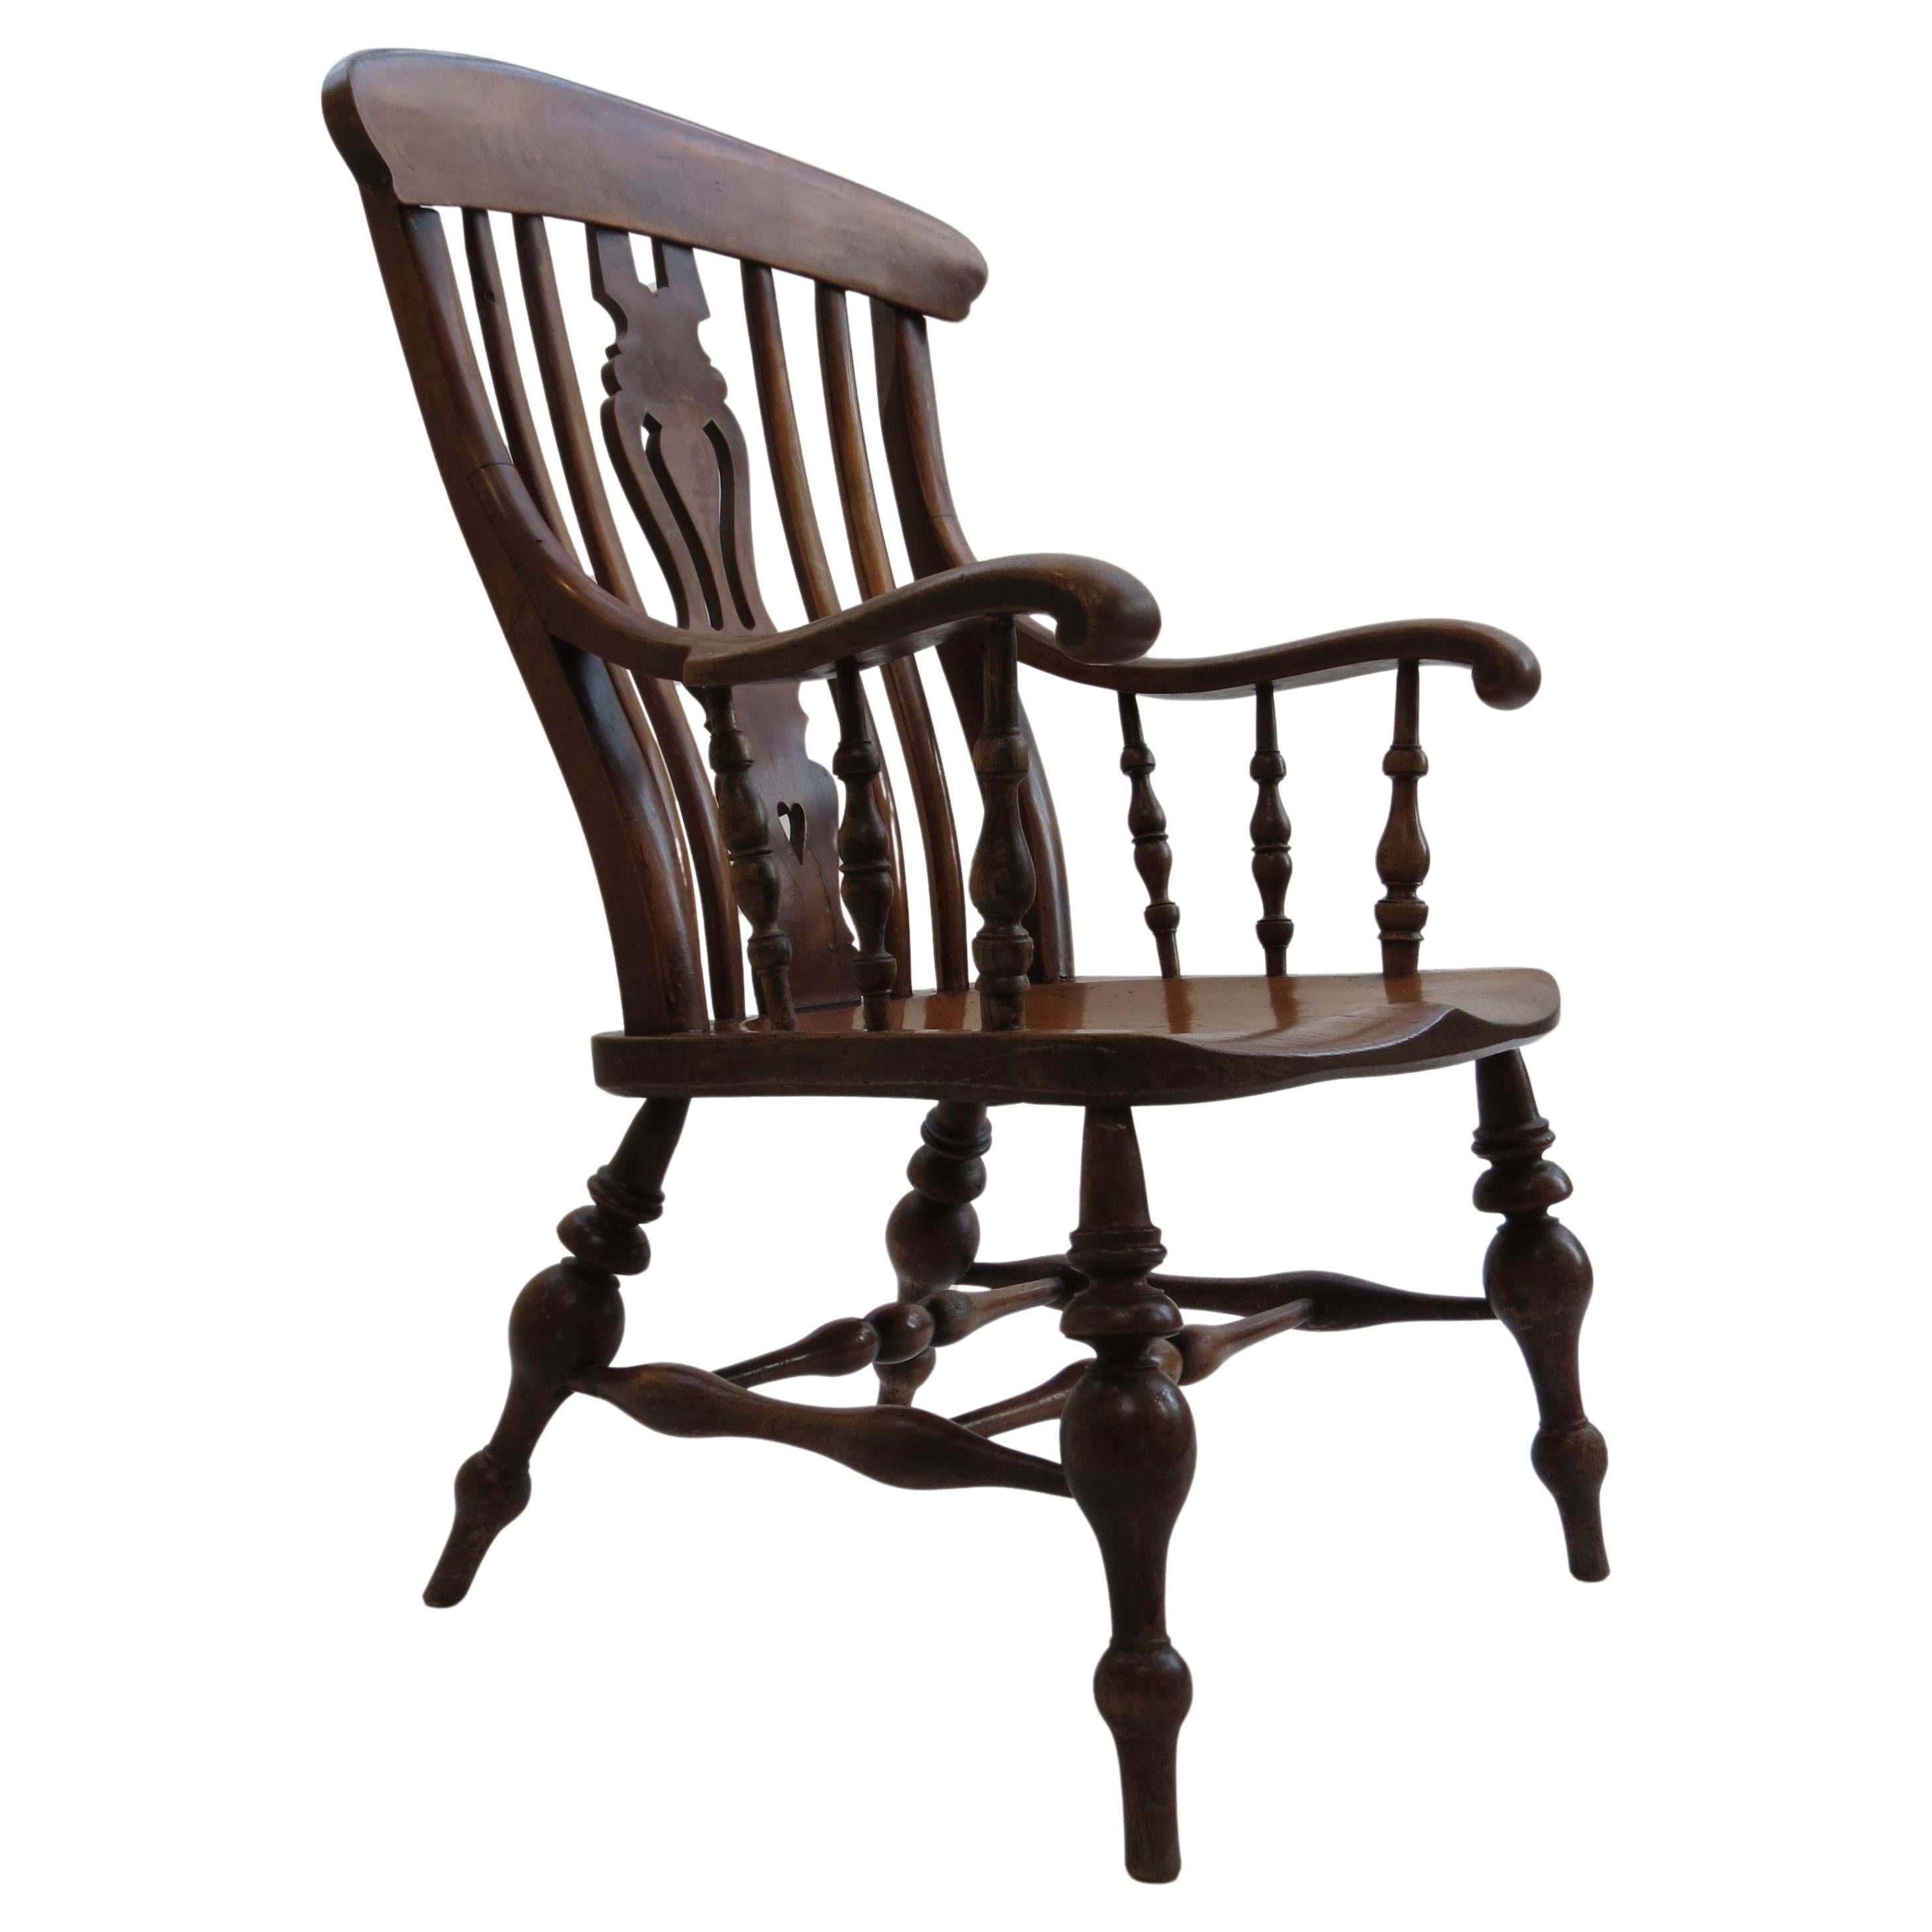 Antique Extra Large Windsor Country Chair 19th Century Ash and Sycamore English